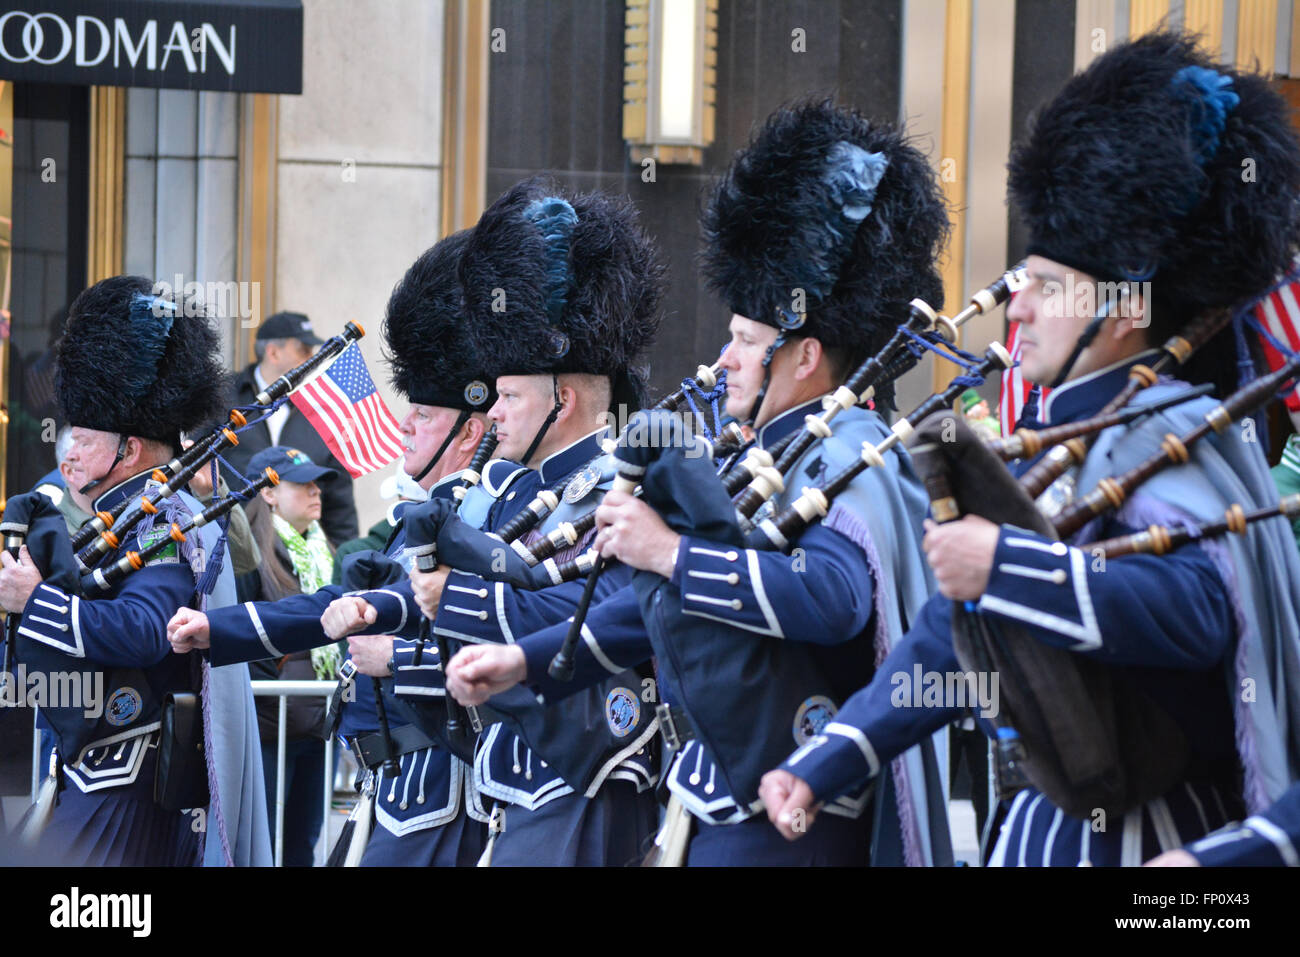 New York, USA. Mar 16, 2016. La cornemuse marching in New York City Saint Patrick's Day Parade. Crédit : Christopher Penler/Alamy Live News Banque D'Images